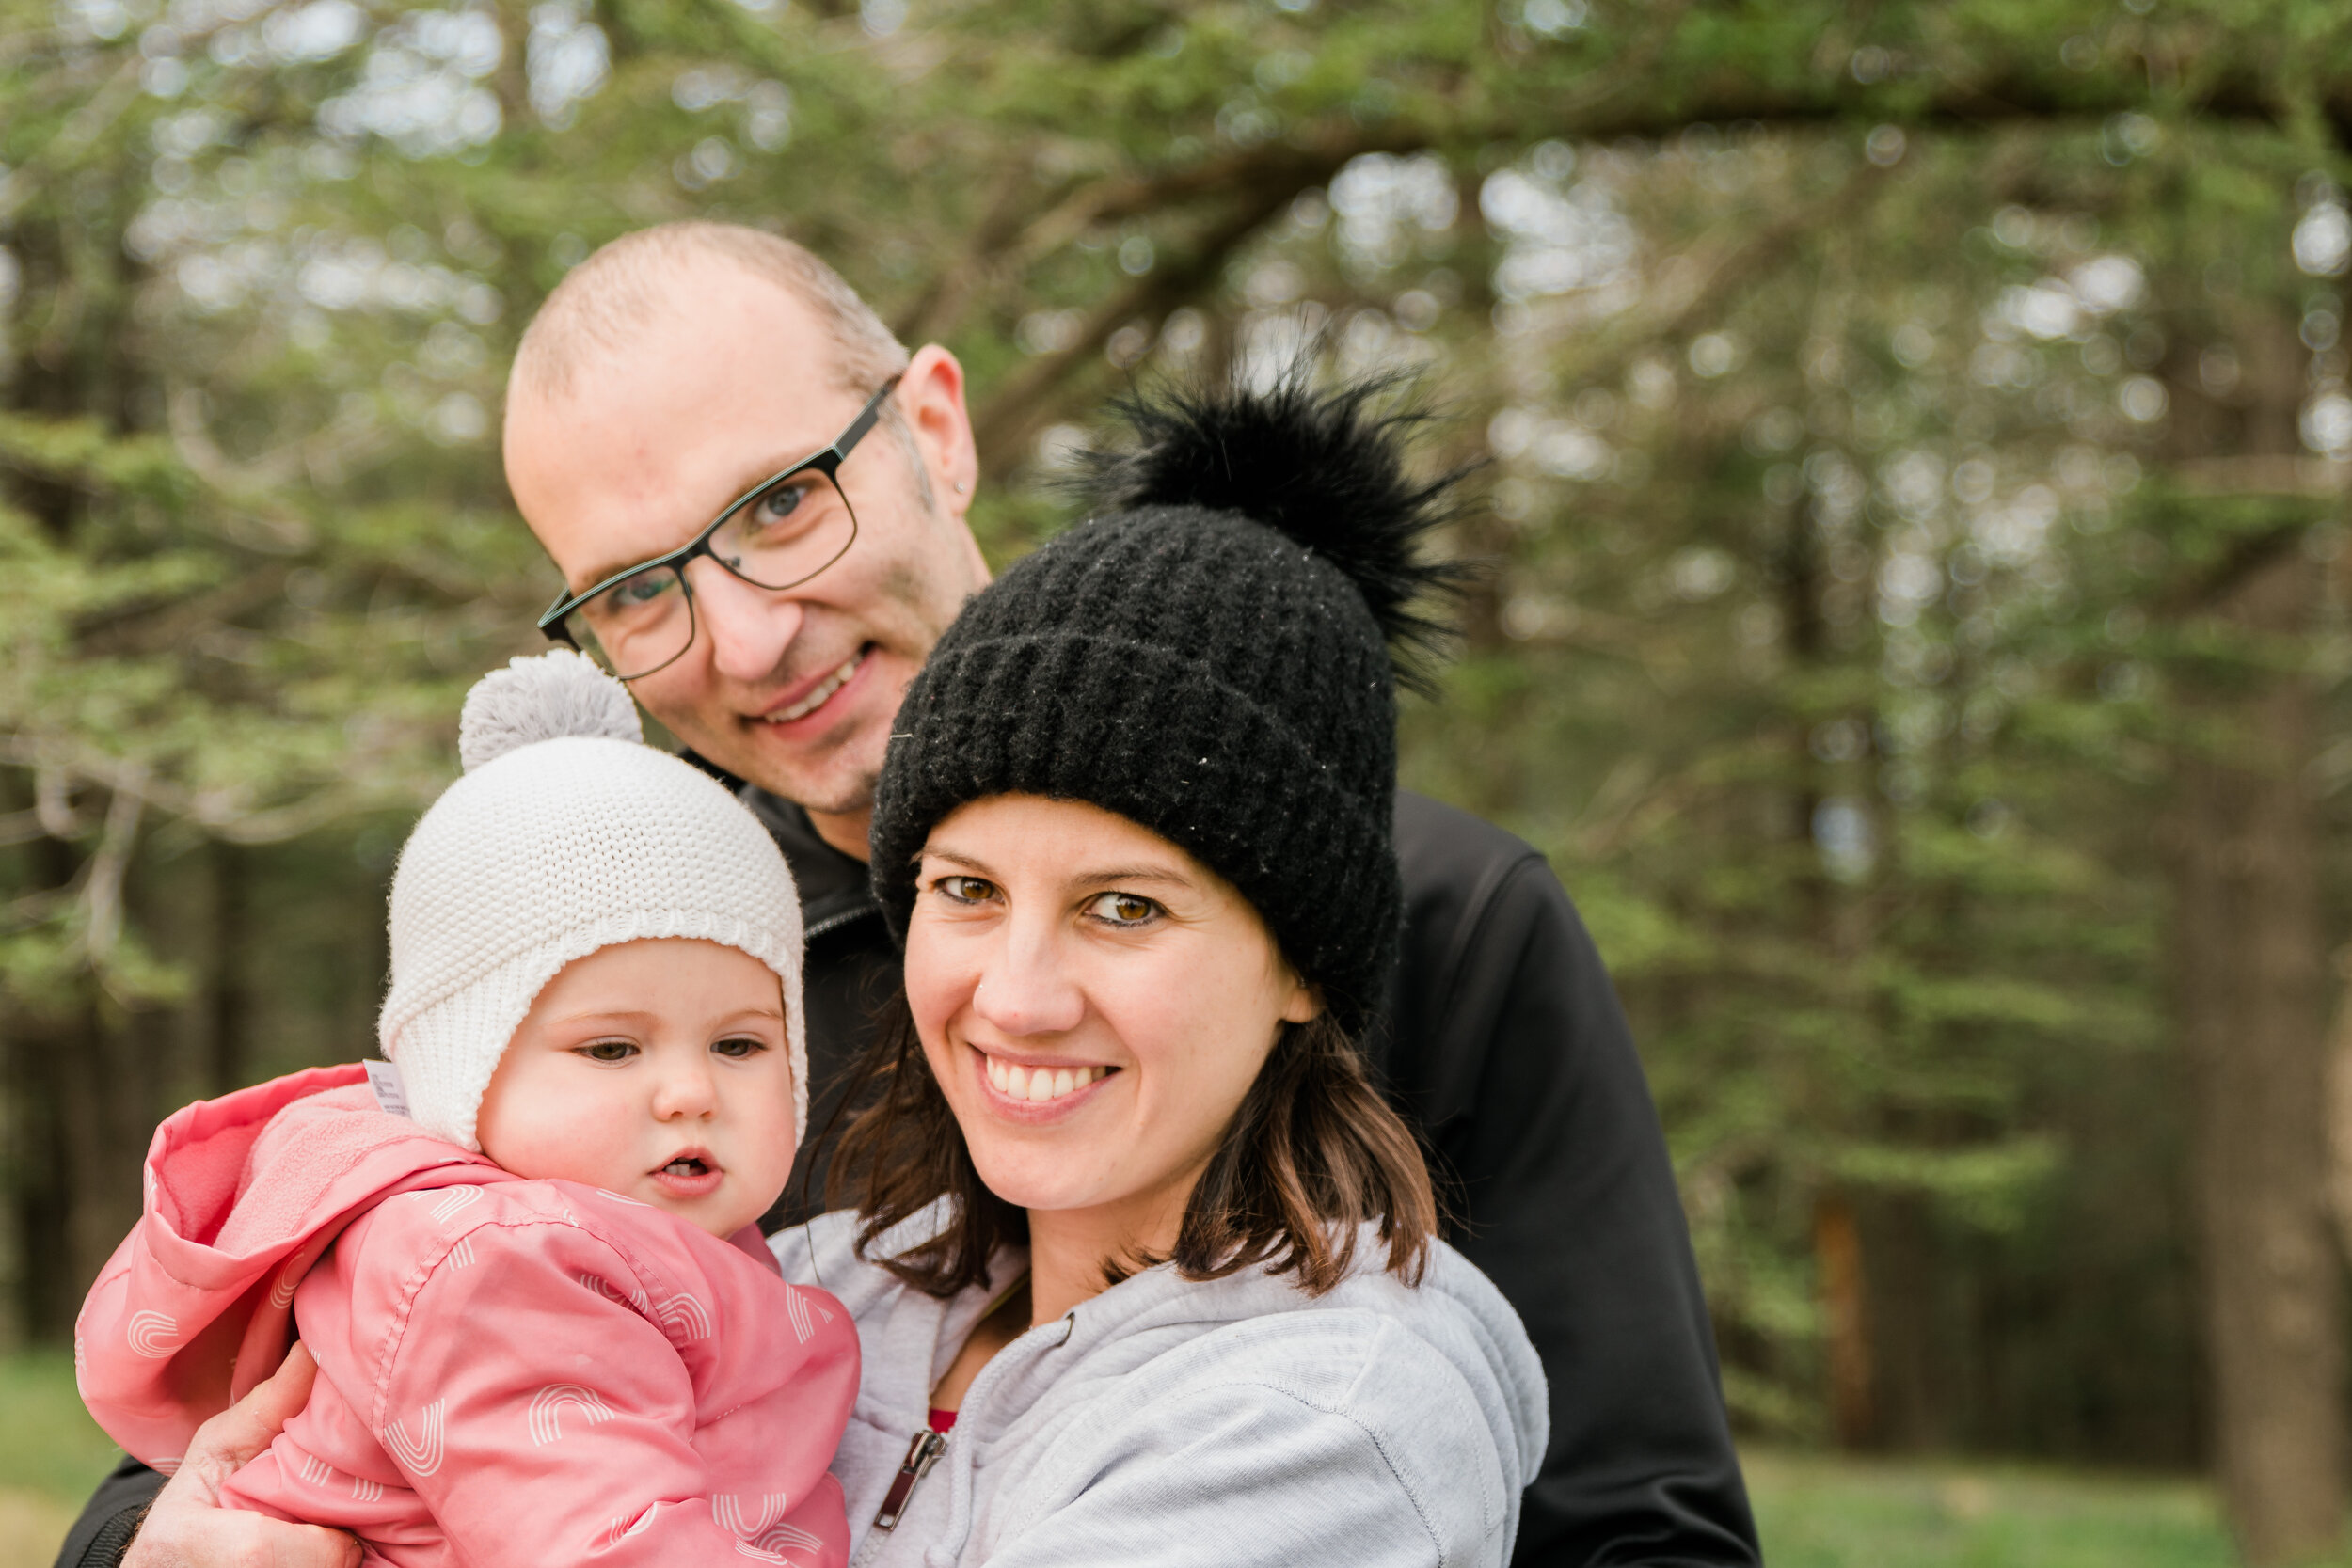 Canberra Family photography: AJ Nitz Images - Family hug each other